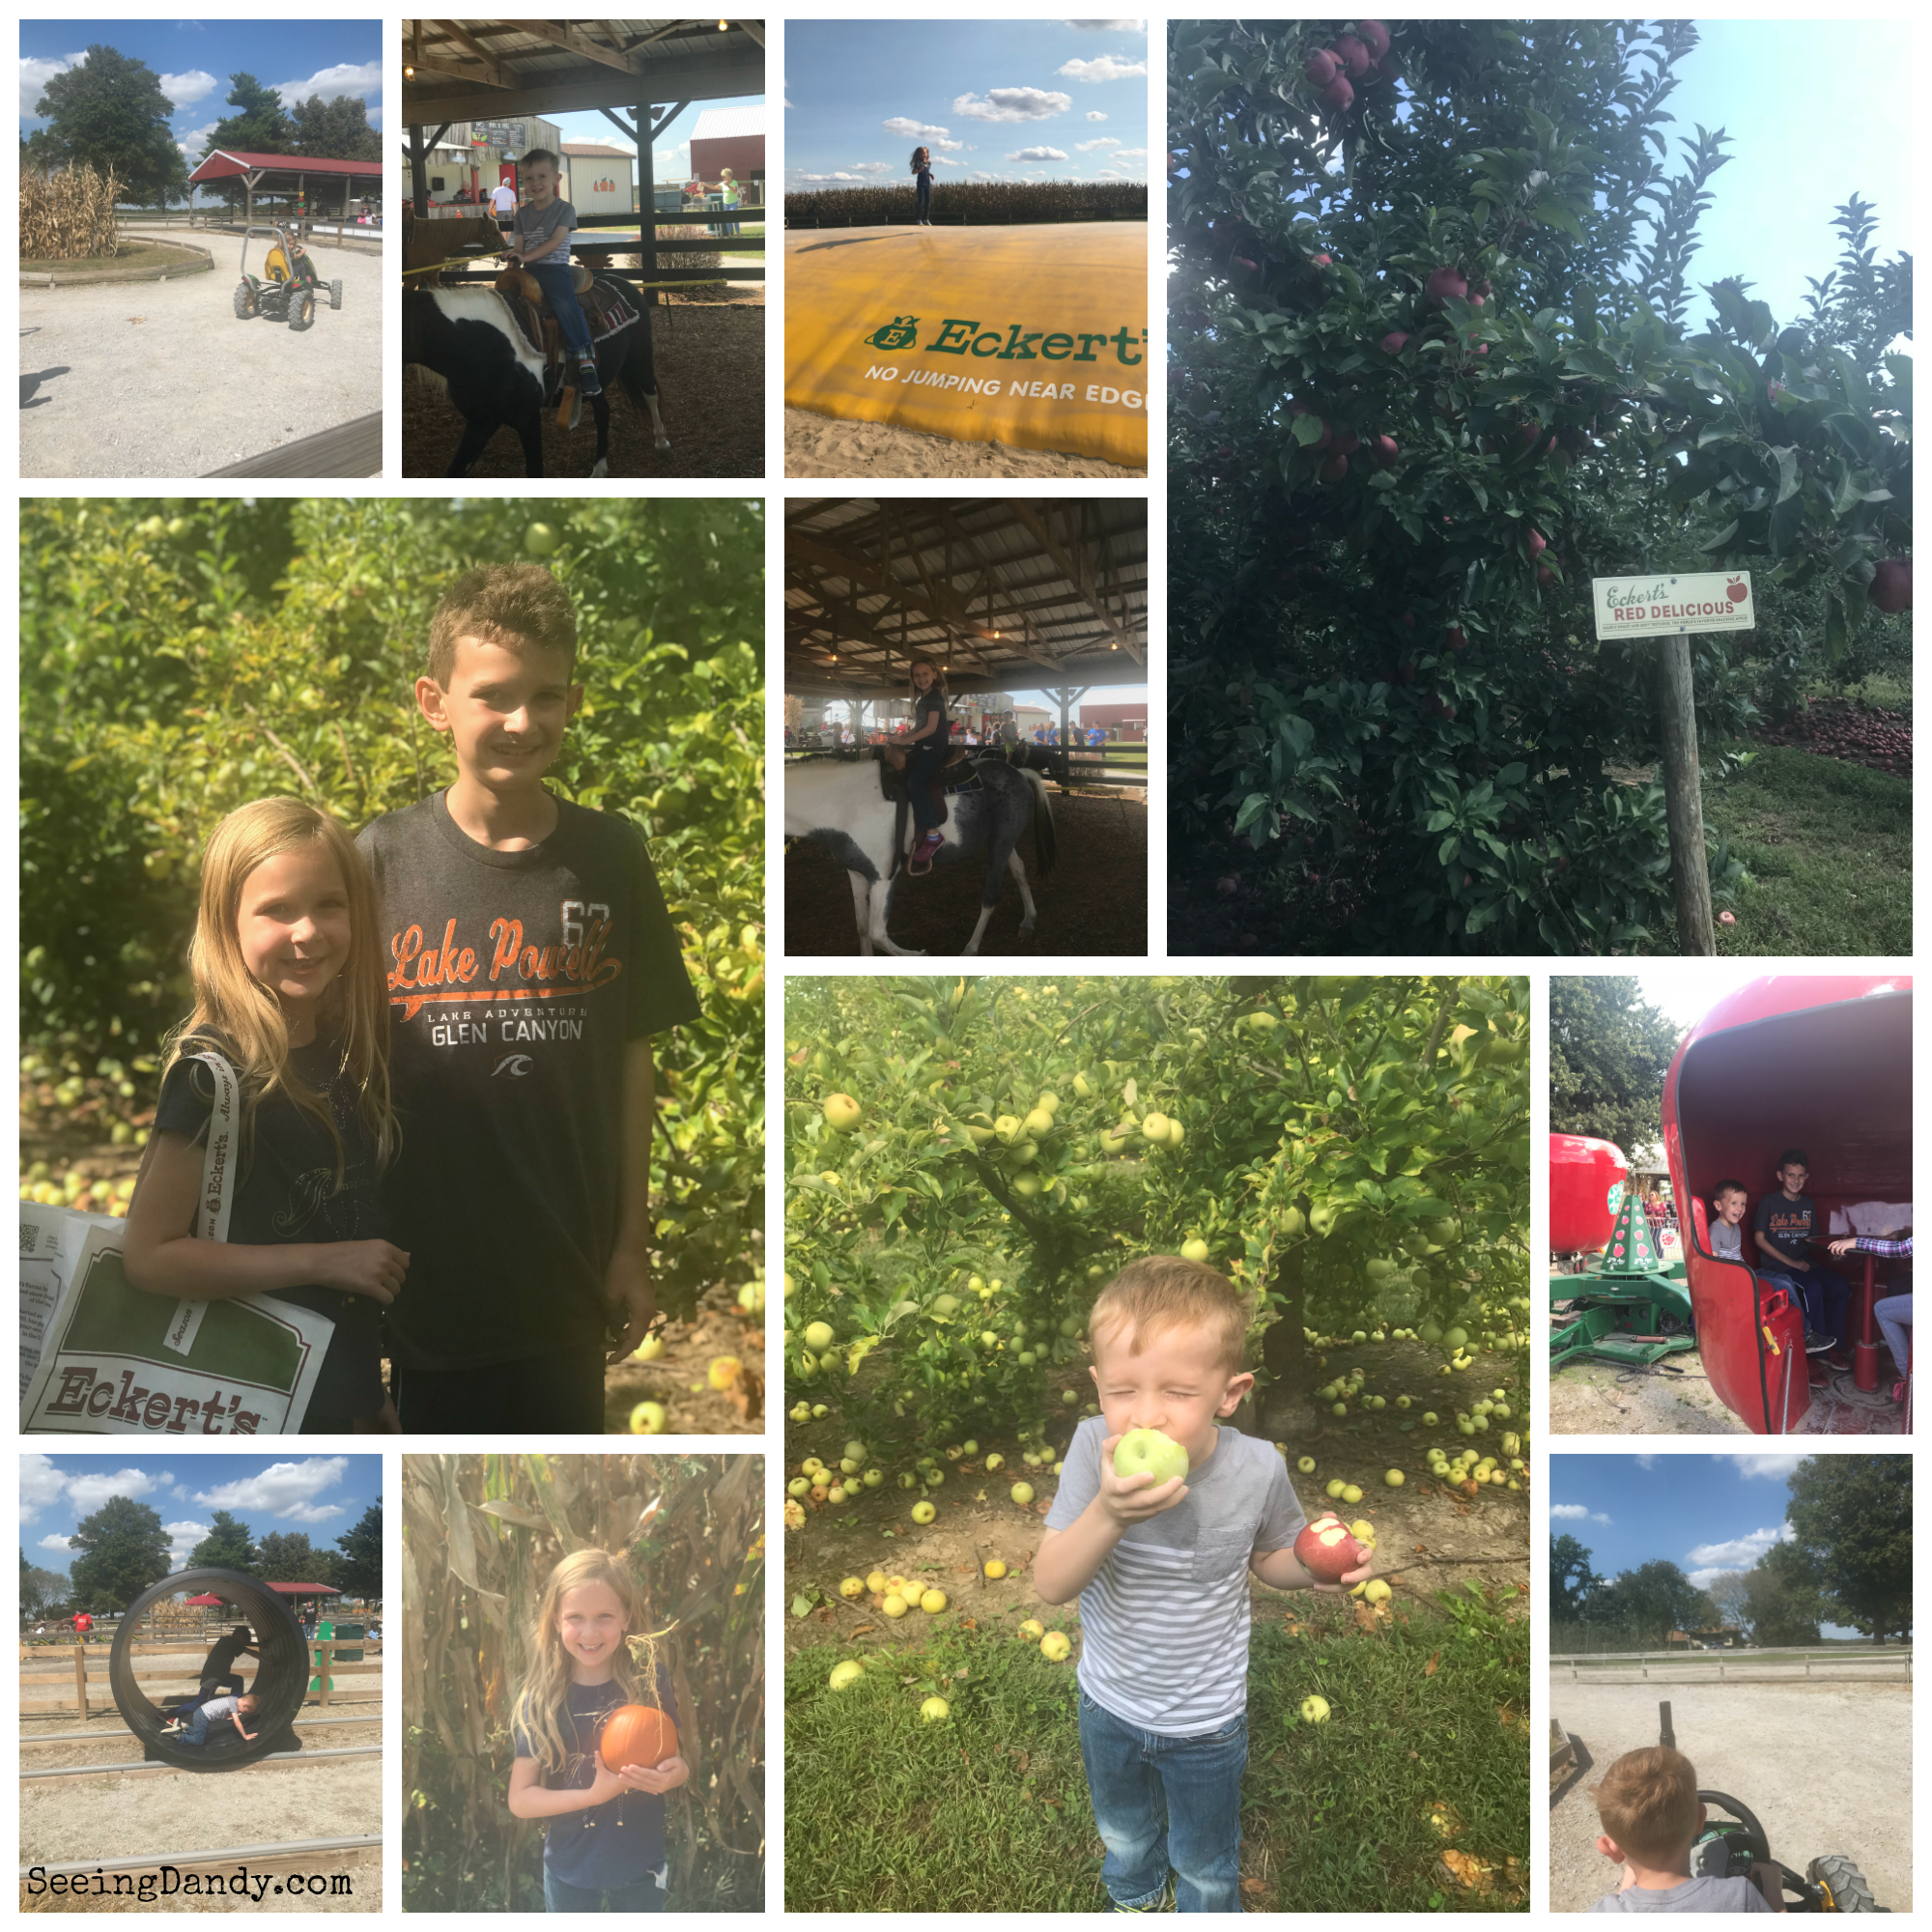 Family fun at Eckerts and picking apples to make foil baked apples.